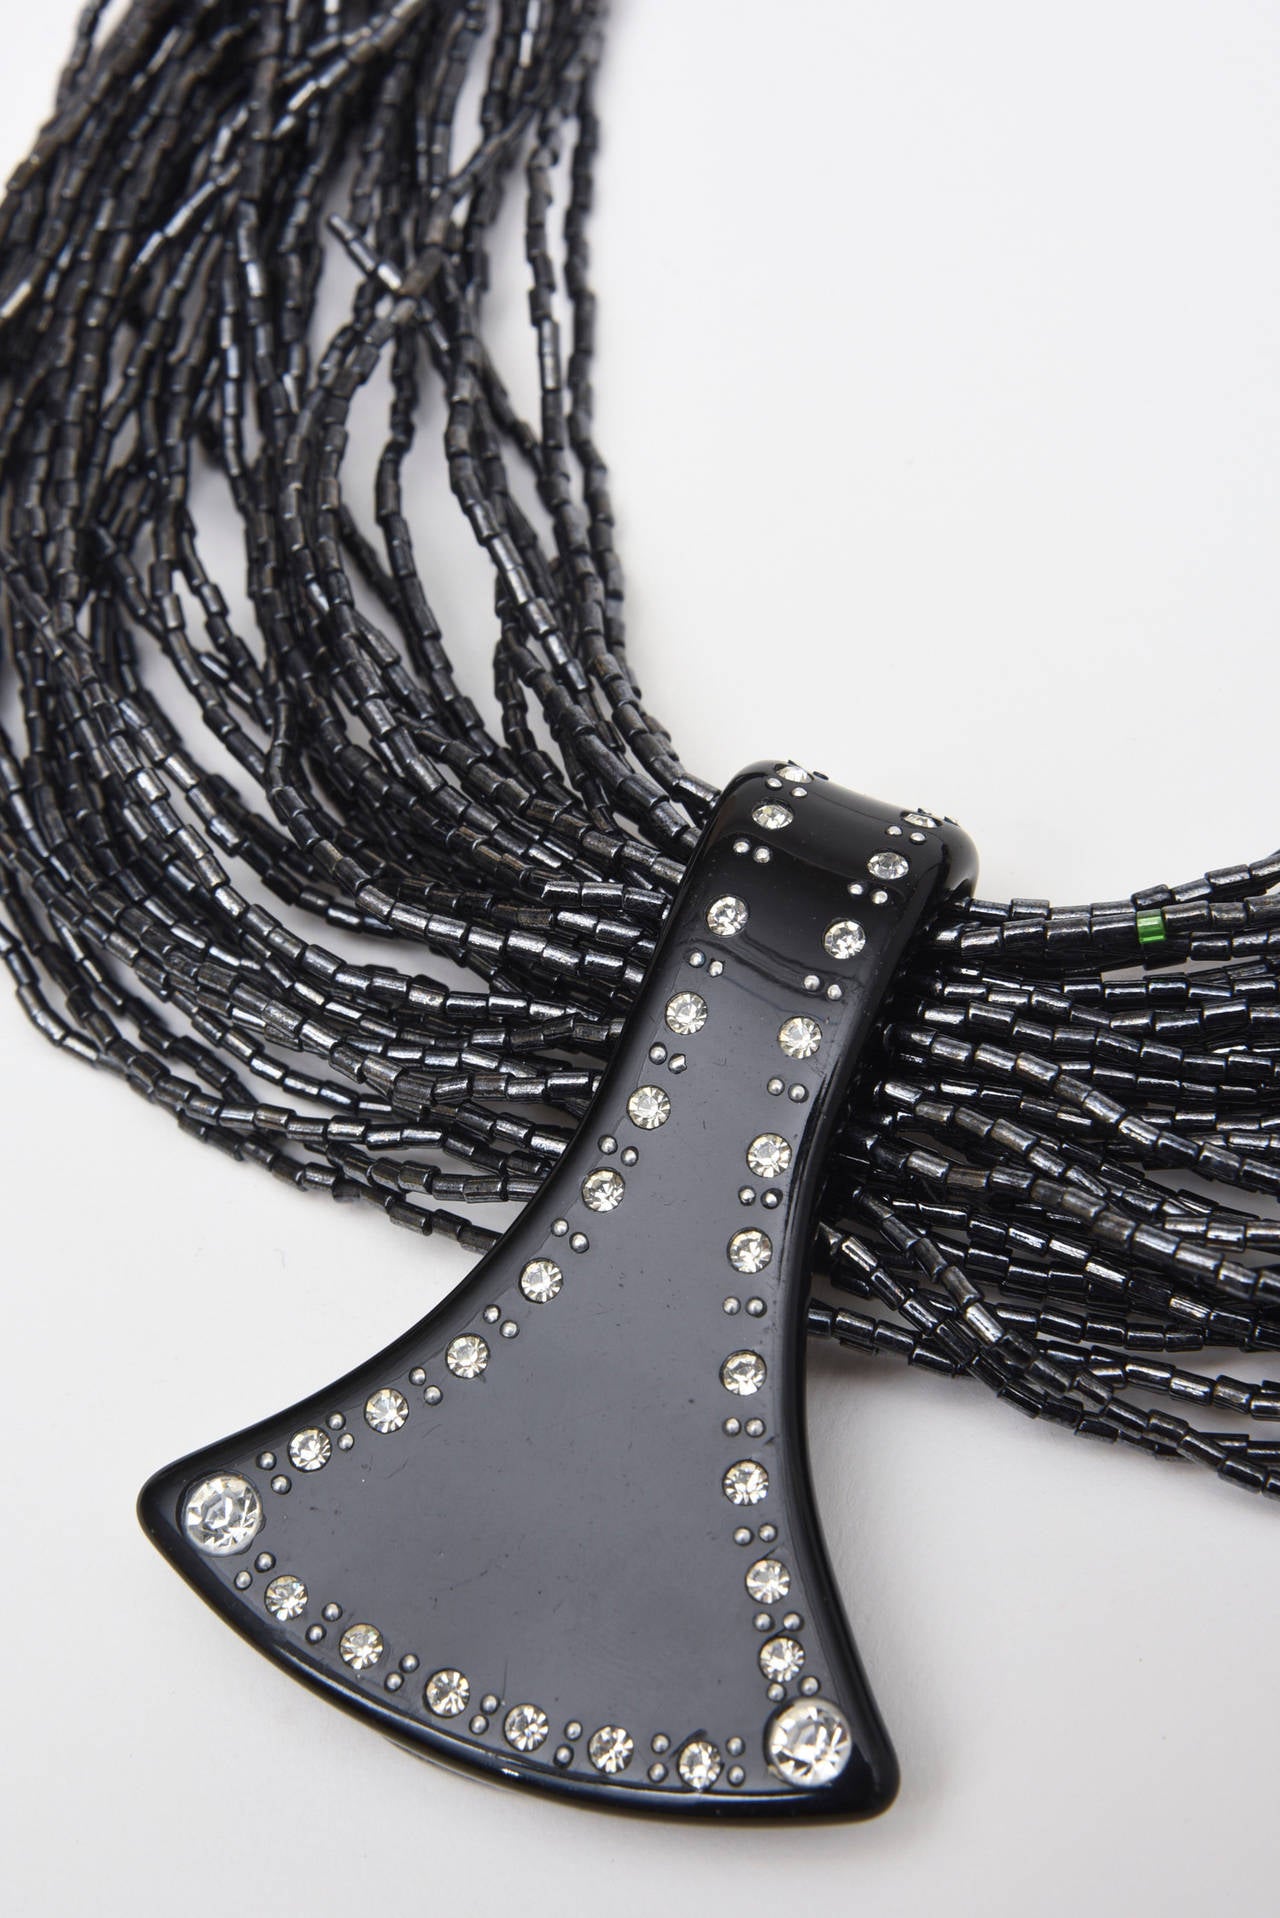 This dramatic and collectable signed Italian Ugo Correani necklace is au courant. It is comprised of hundreds of tiny linked black glass beads in many many strands with a lucite and rhinestone pendant. The sculptural end is a black lucite studded